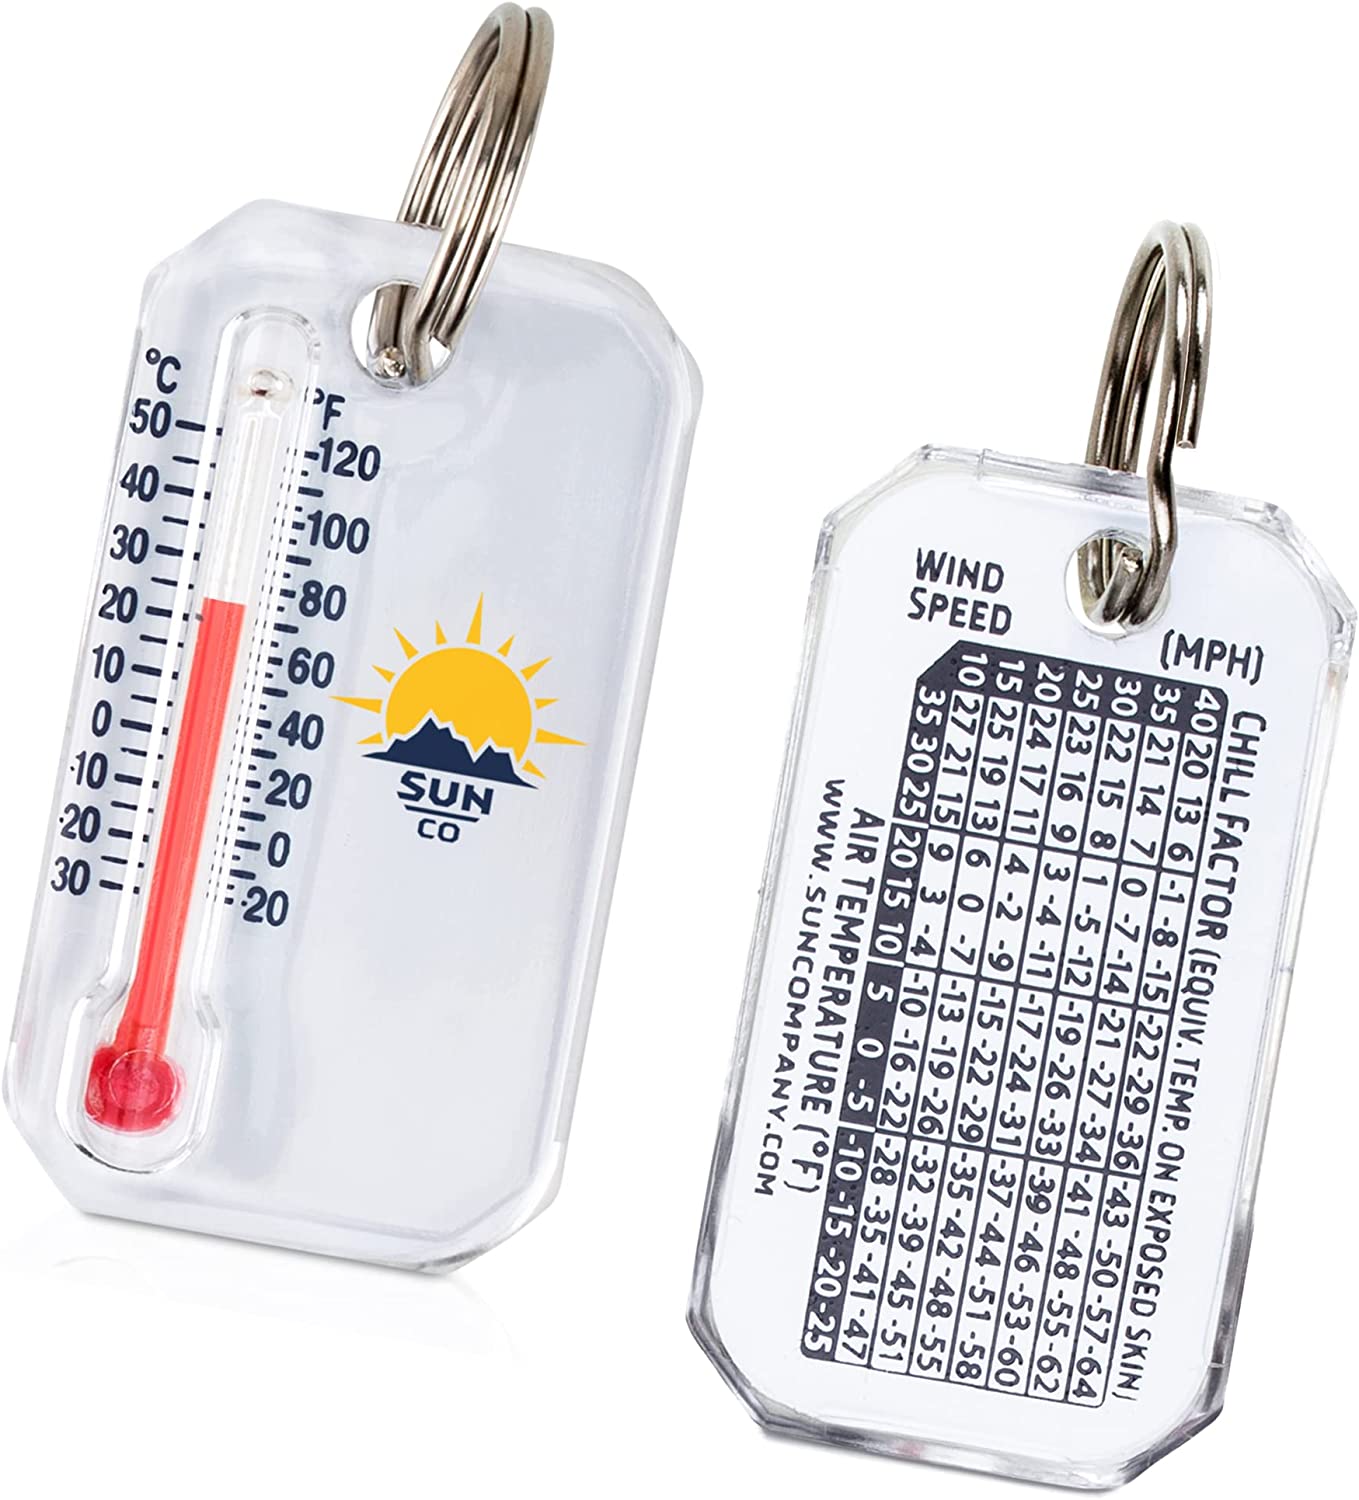 Sun Company Original Zip-o-gage – Zipper Pull Thermometer for Jacket, Parka, or Backpack | Mini Outdoor Keychain Thermometer with Windchill Chart on Back